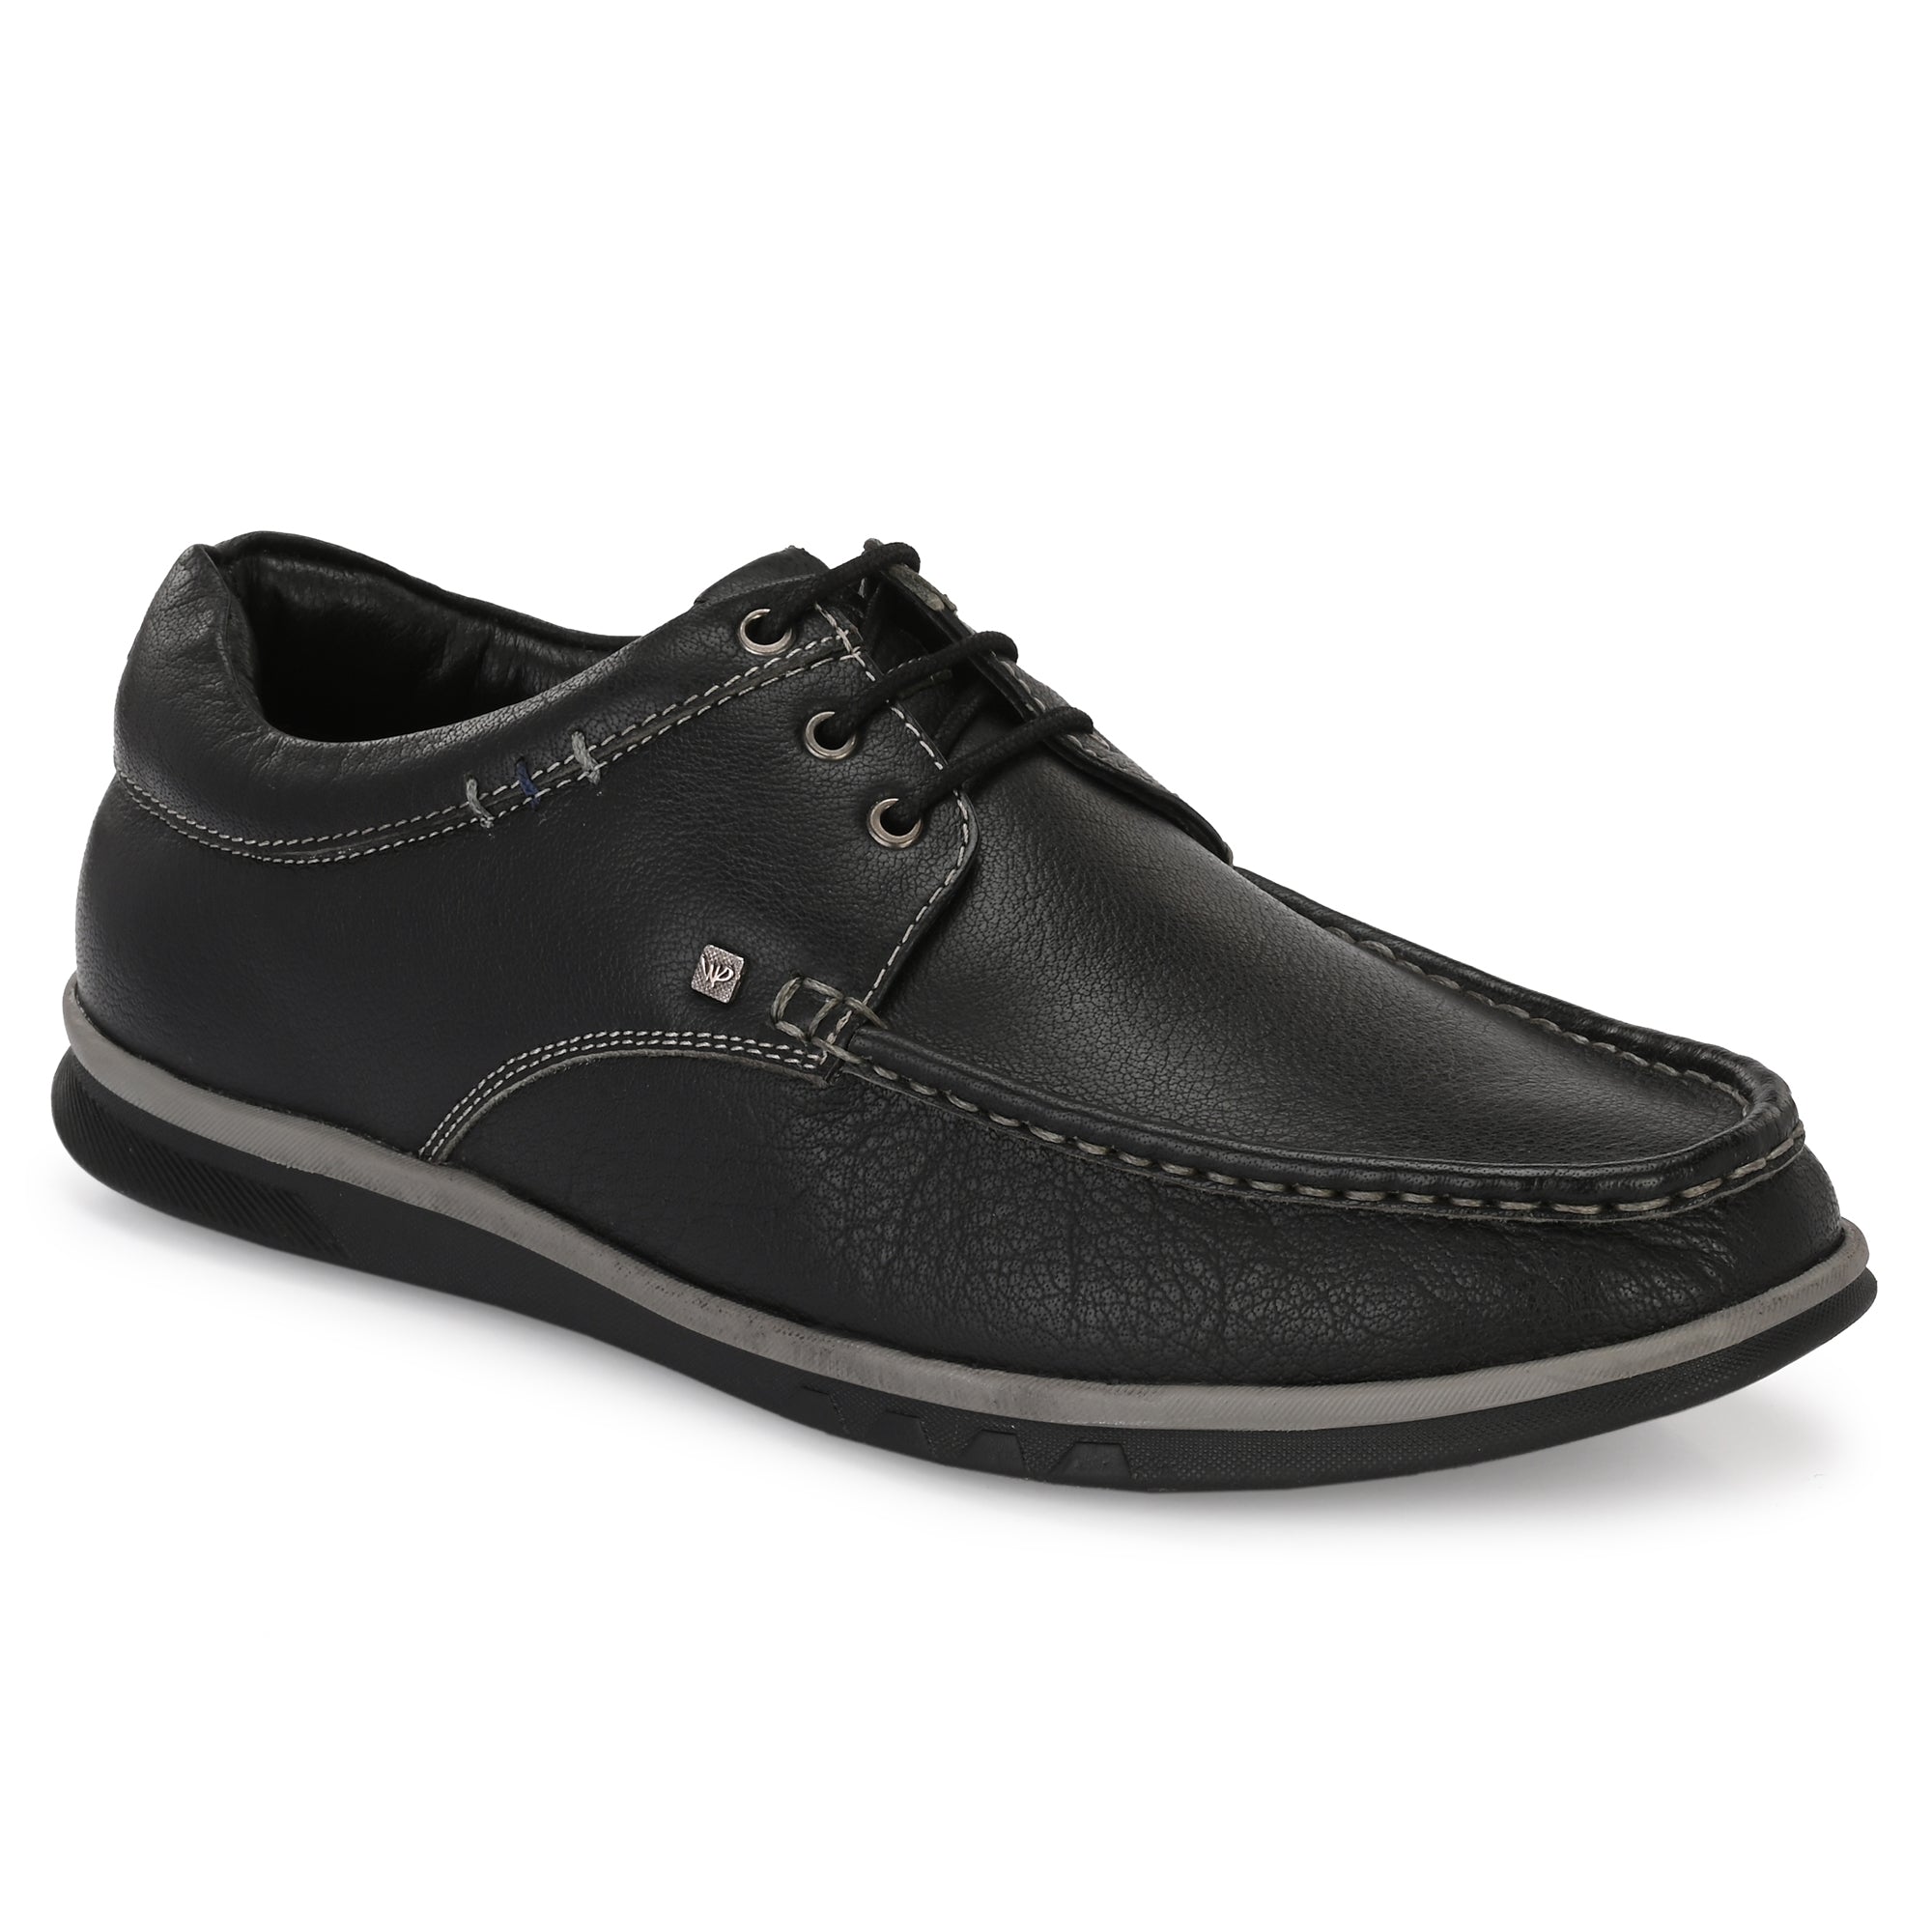 FASCINATE-55 MEN LEATHER BLACK CASUAL LACE UP DERBY